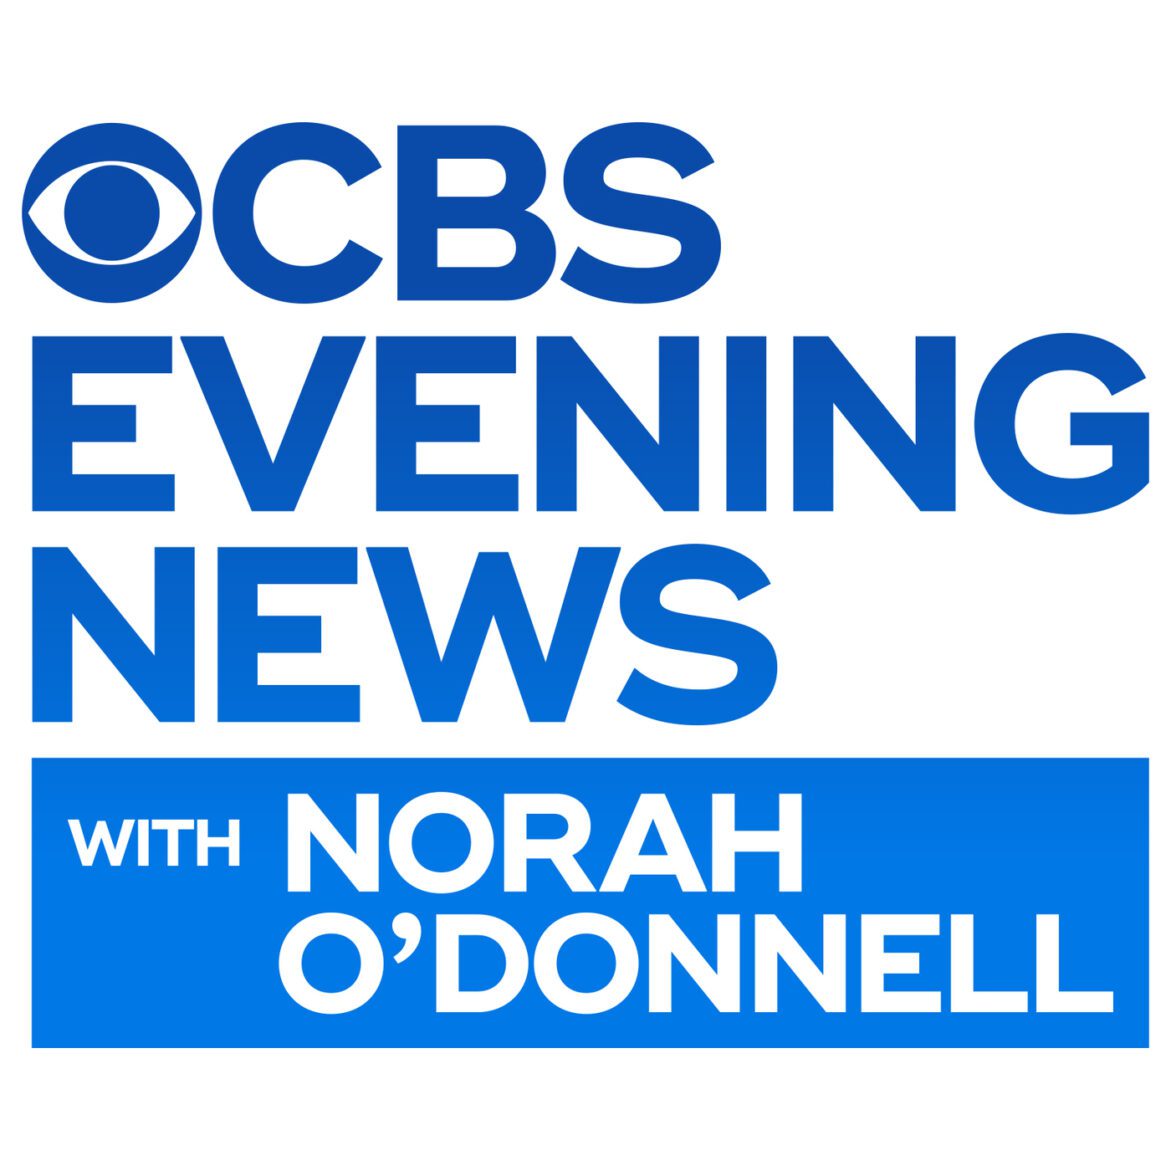 Black Podcasting - CBS Evening News with Norah O'Donnell, 12/17